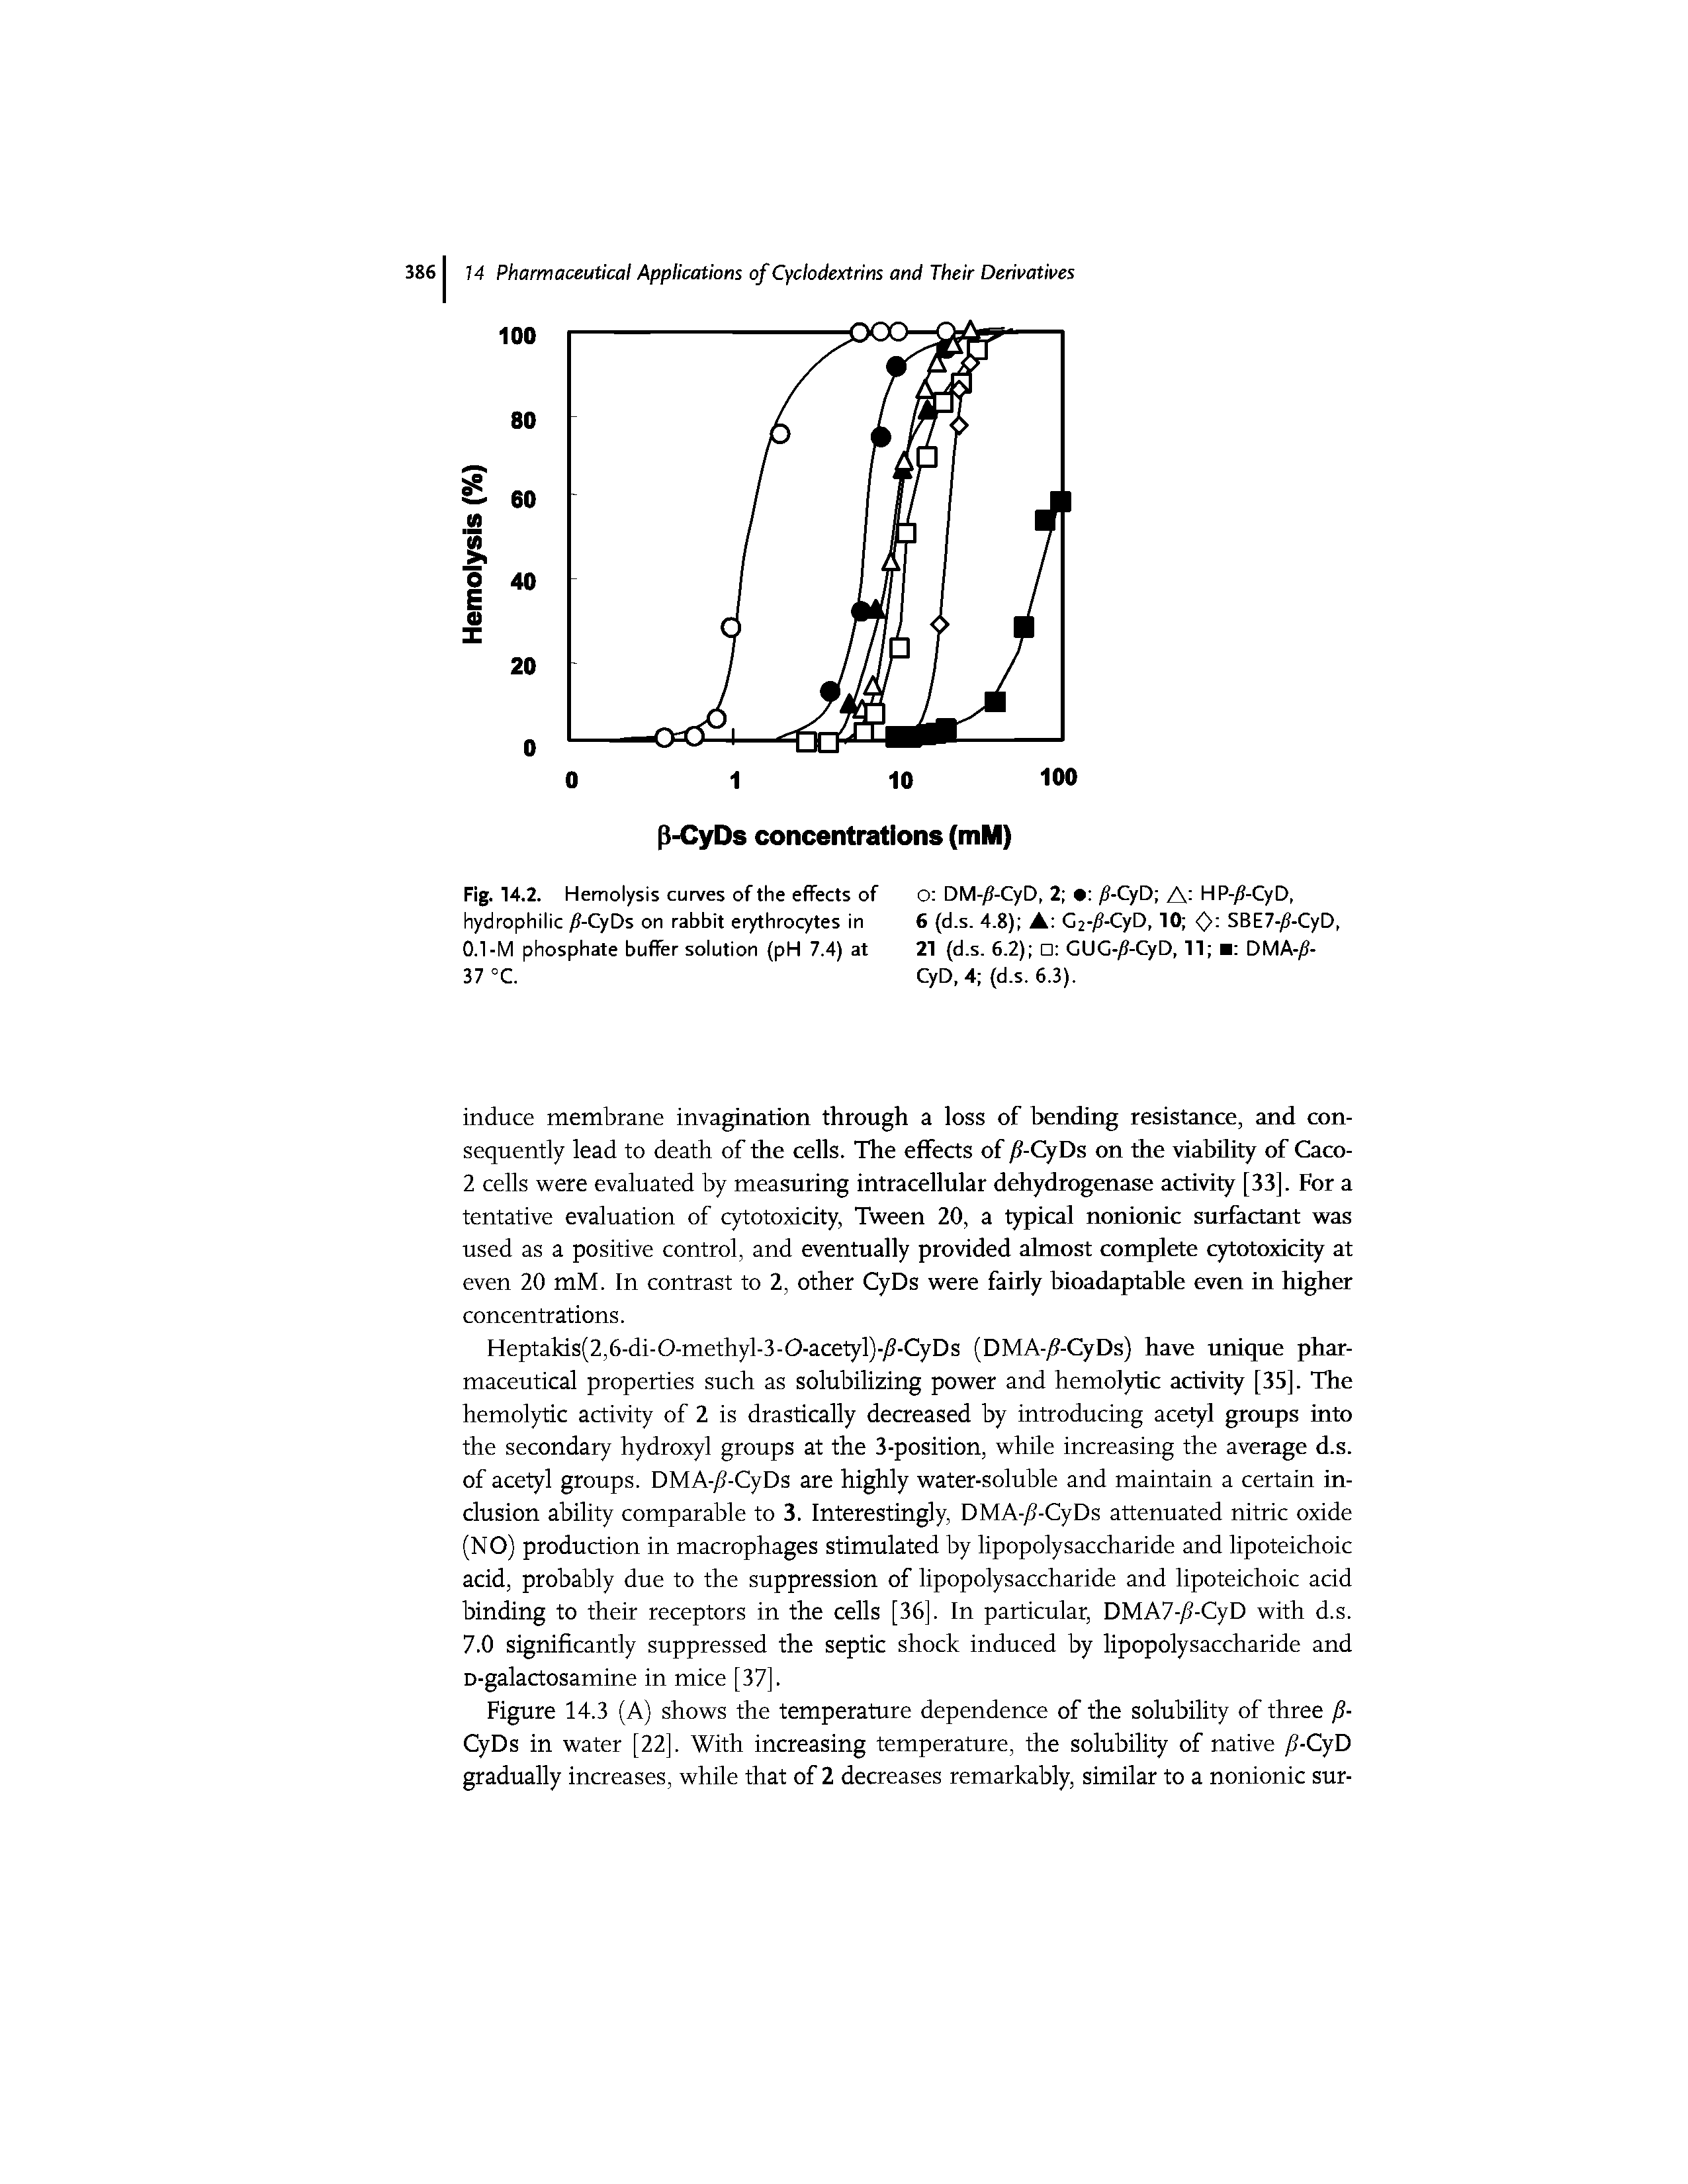 Fig. 14.2. Hemolysis curves of the effects of hydrophilic -CyDs on rabbit erythrocytes in 0.1-M phosphate buffer solution (pH 7.4) at 37 °C.